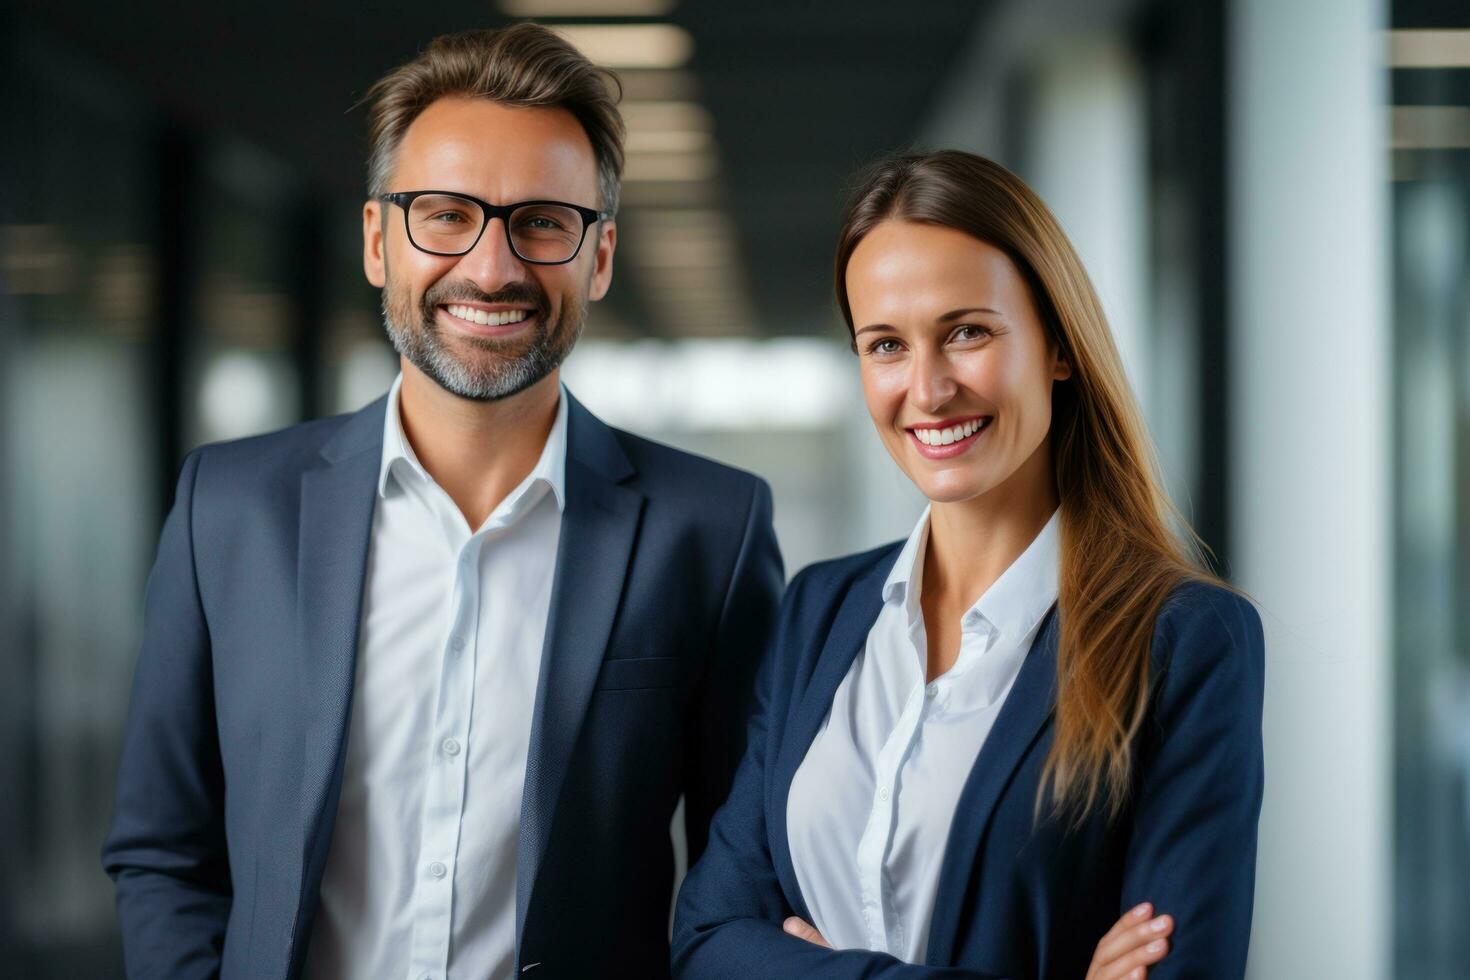 Business couple smiling in an office photo